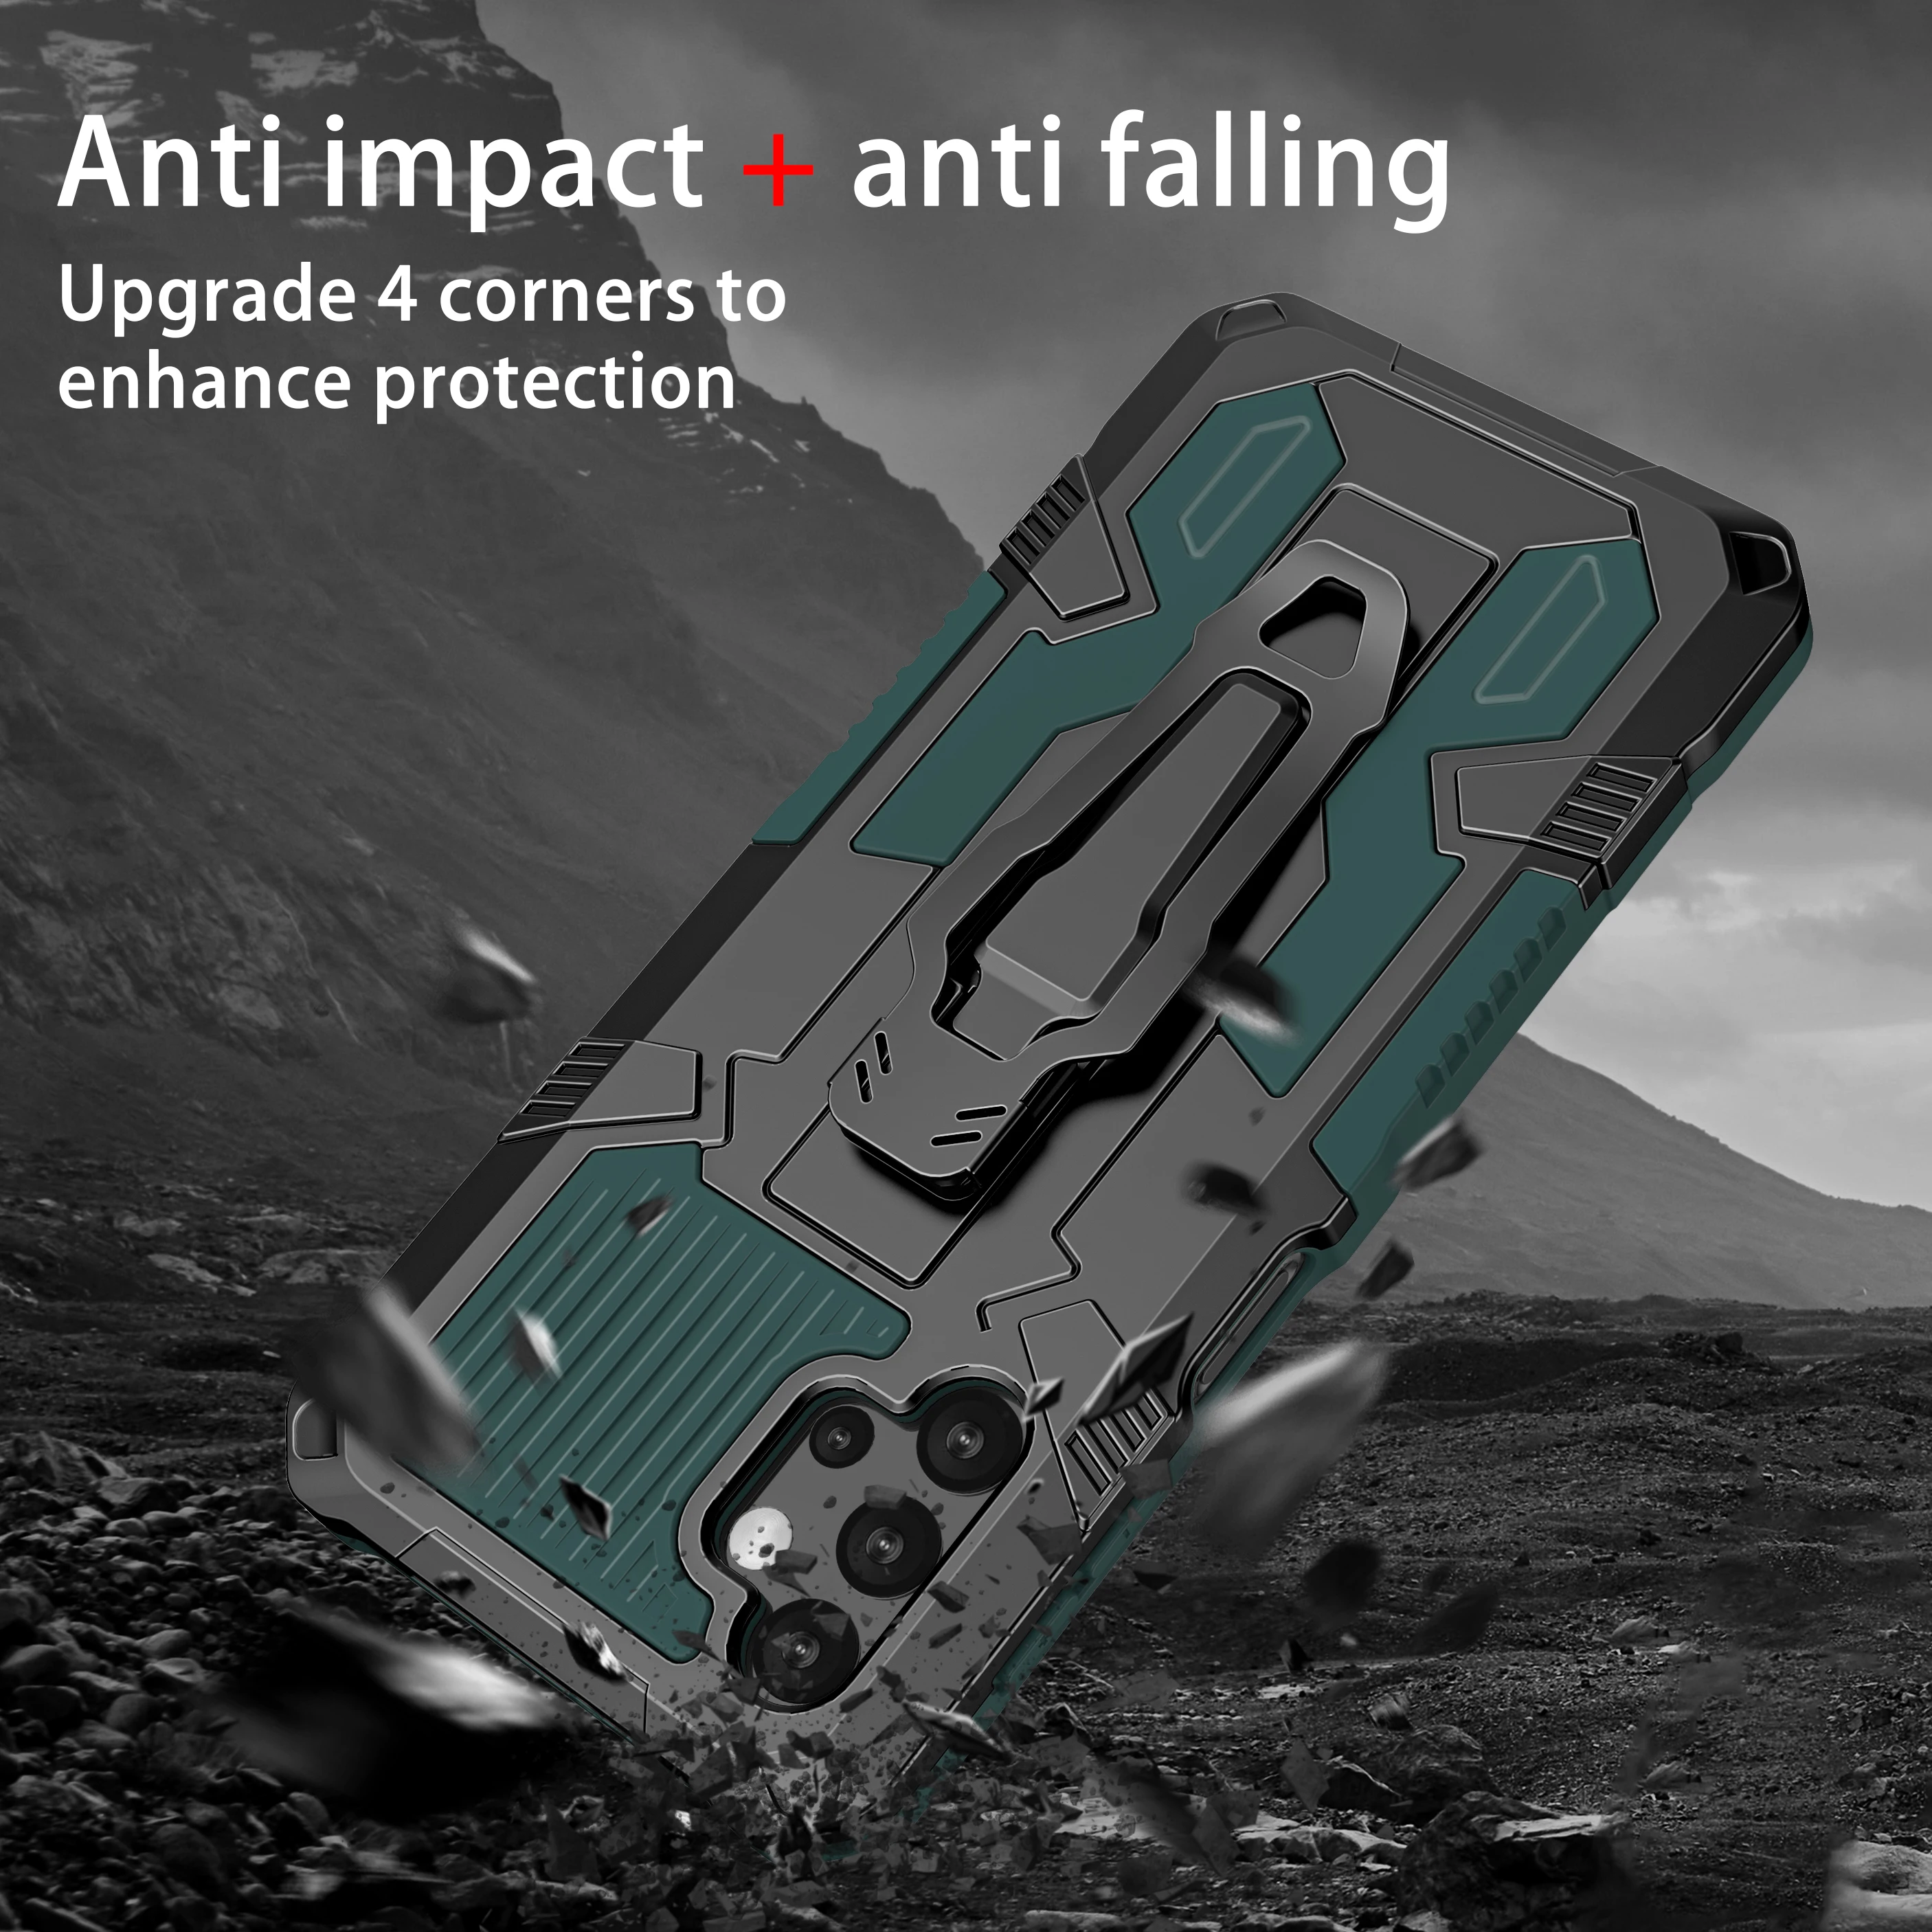 

Magnet Case For Samsung Galaxy A51 A71 A10 M10 A20 J7PRIME J6PLUS NOTE10 S20 PLUS A70S M10S A01 Rugged Hybrid Armor Stand Covers